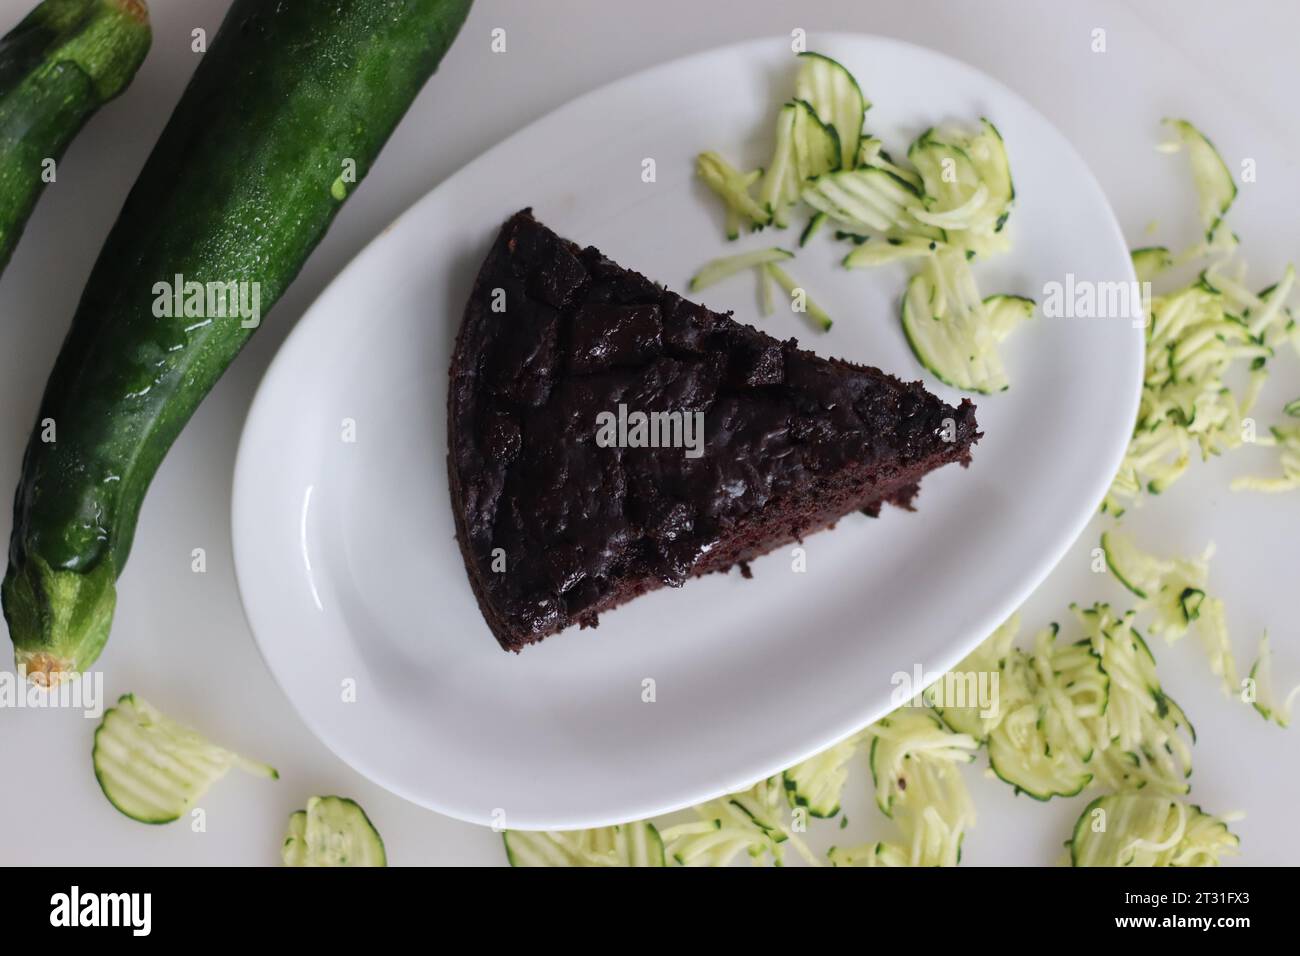 Slice of Zucchini chocolate cake. Moist double chocolate cake with grated zucchini, coco powder, chocolate and chocolate chips. Shot on white backgrou Stock Photo